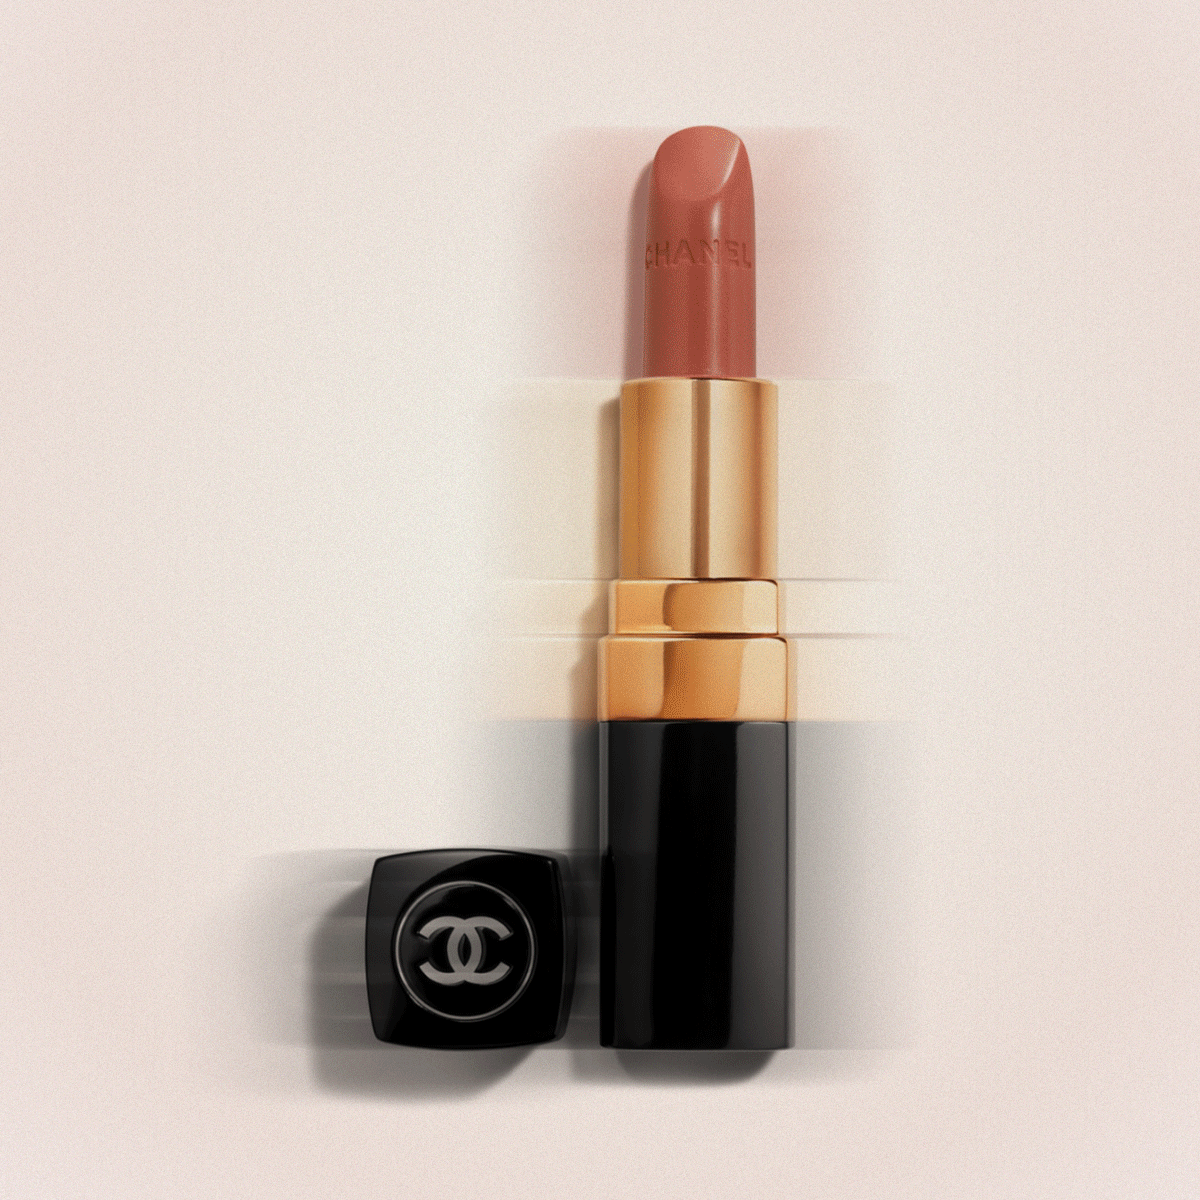 3 Chanel Beauty Products That Changed the Industry Forever  Vogue